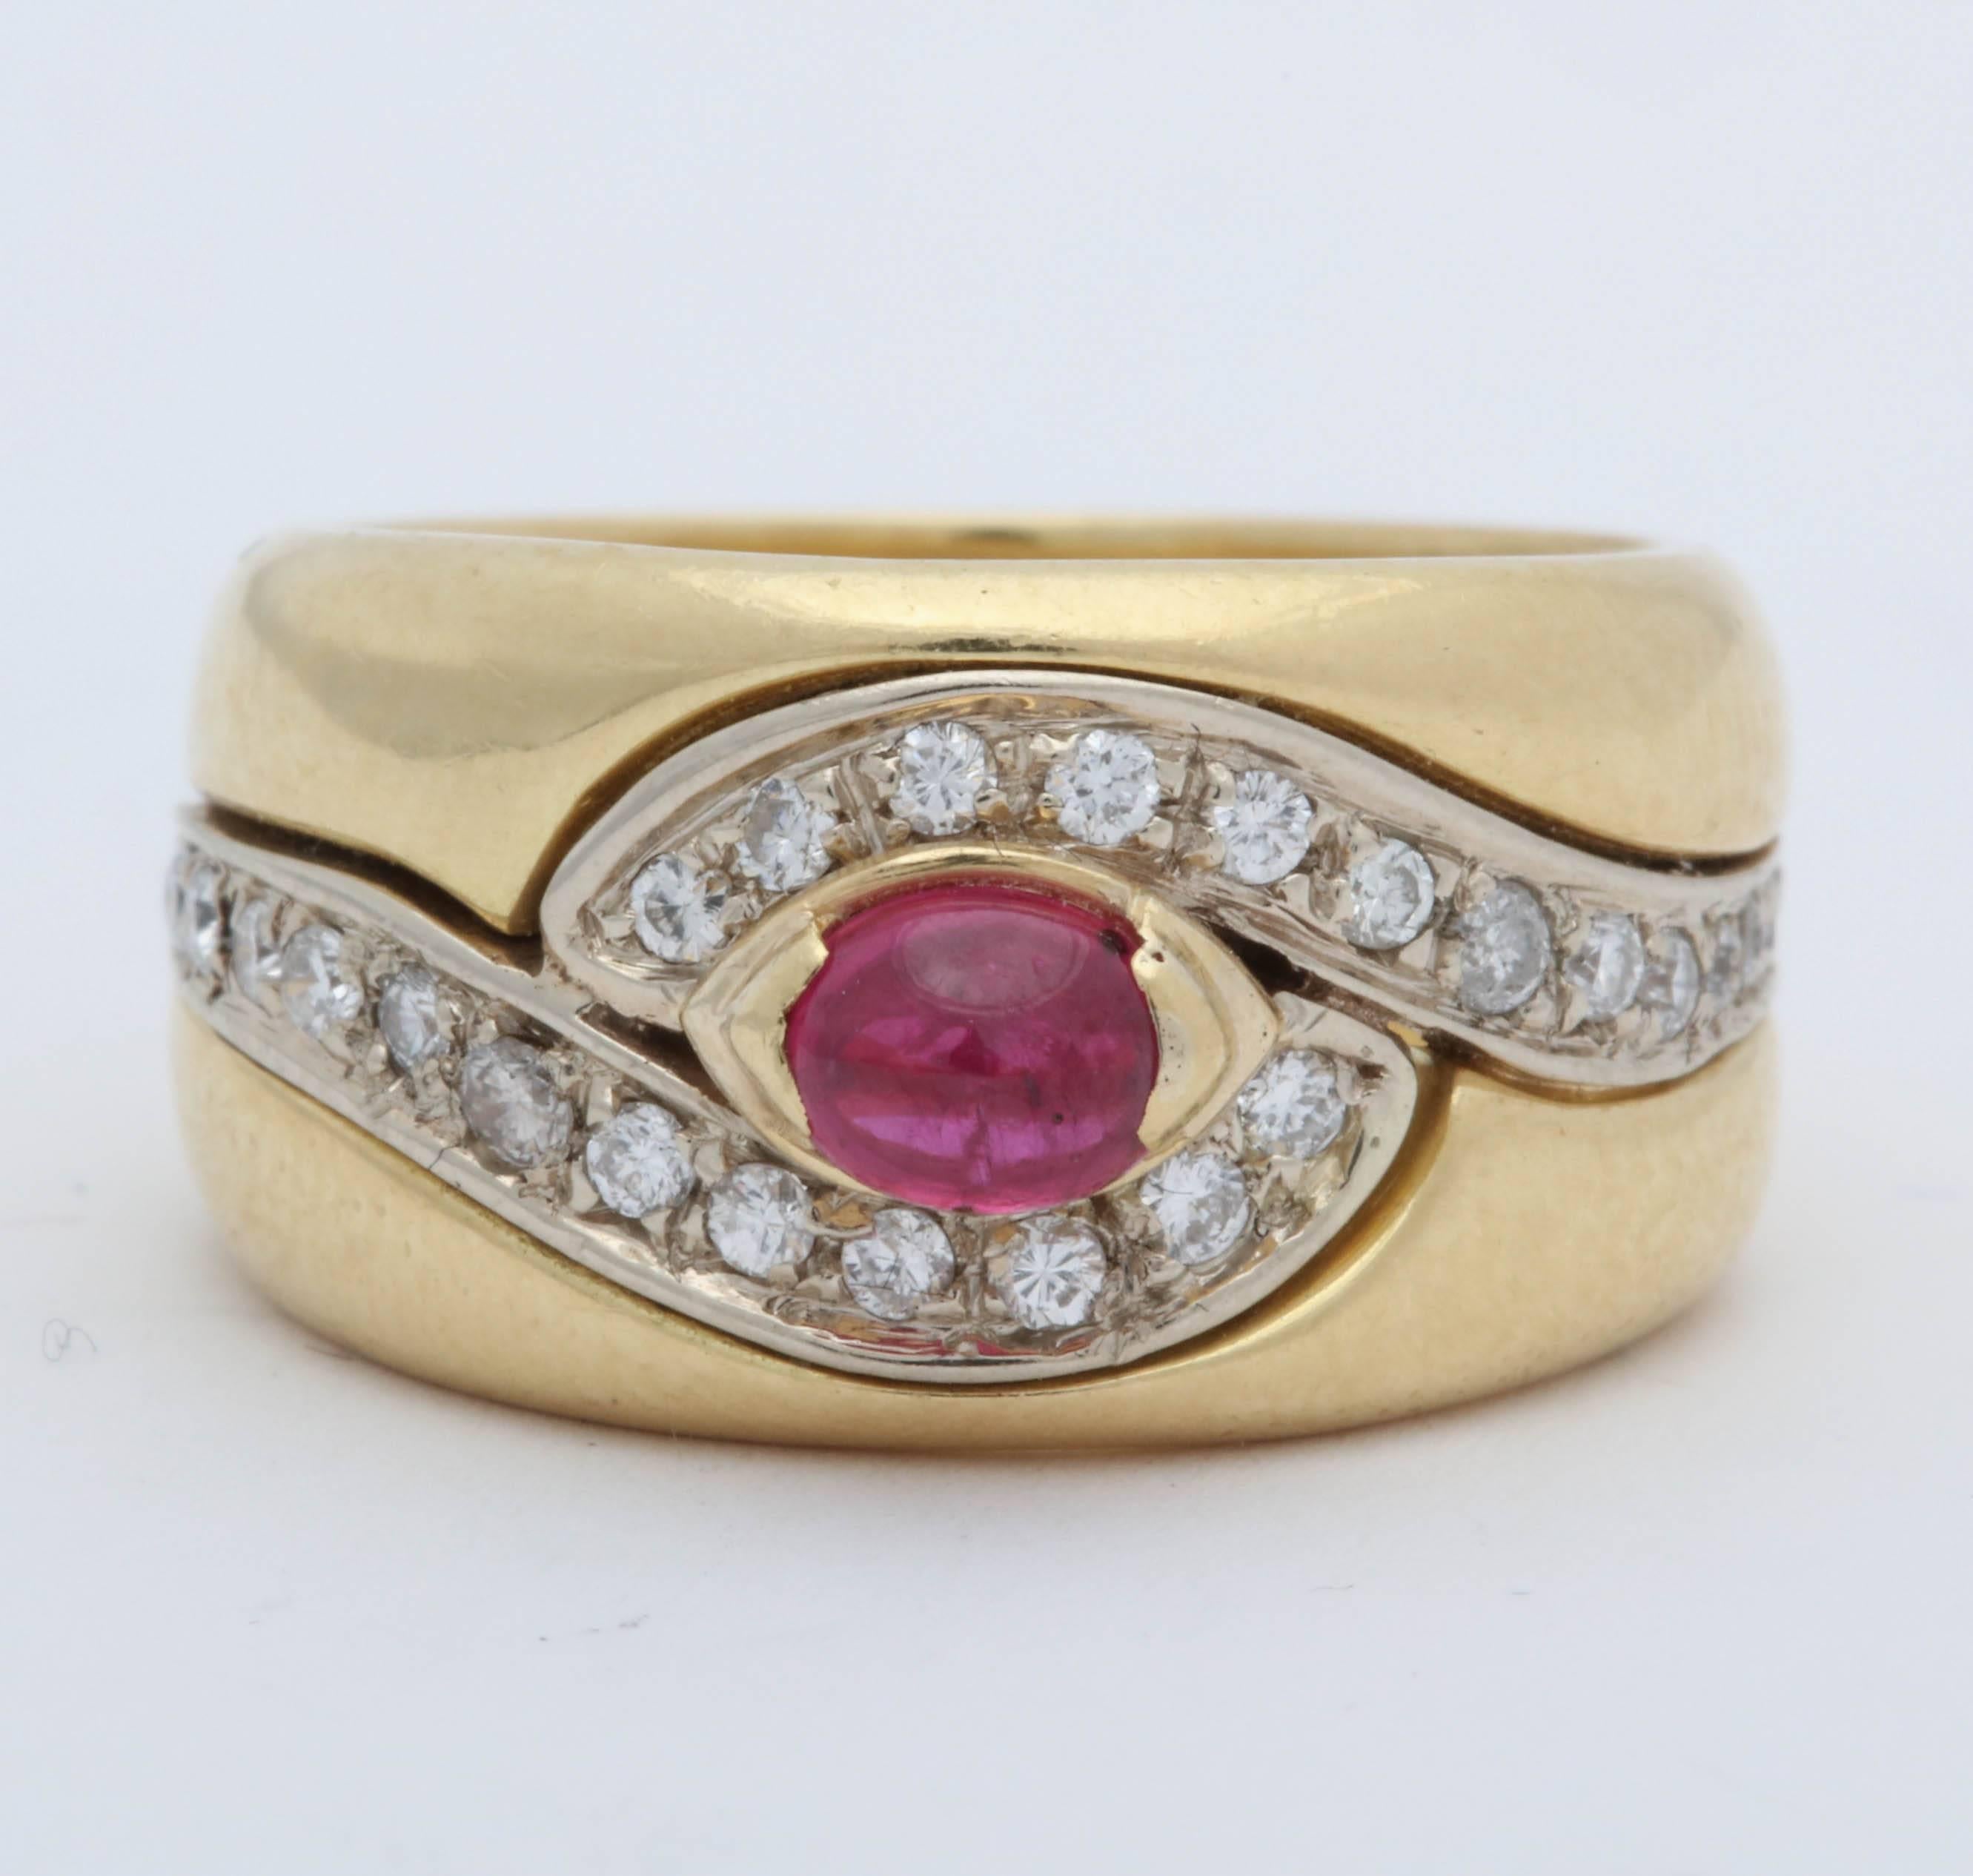 One Ladies 18kt Yellow Gold Band Style Ring Embellished With A >25 Ct Approximate Weight Cabochon Ruby. This Band Is further Designed With Numerous Full Cut Diamonds In A Swirl Type Pattern. Approximate Full Cut Diamond Weight = .90cts Total Weight.